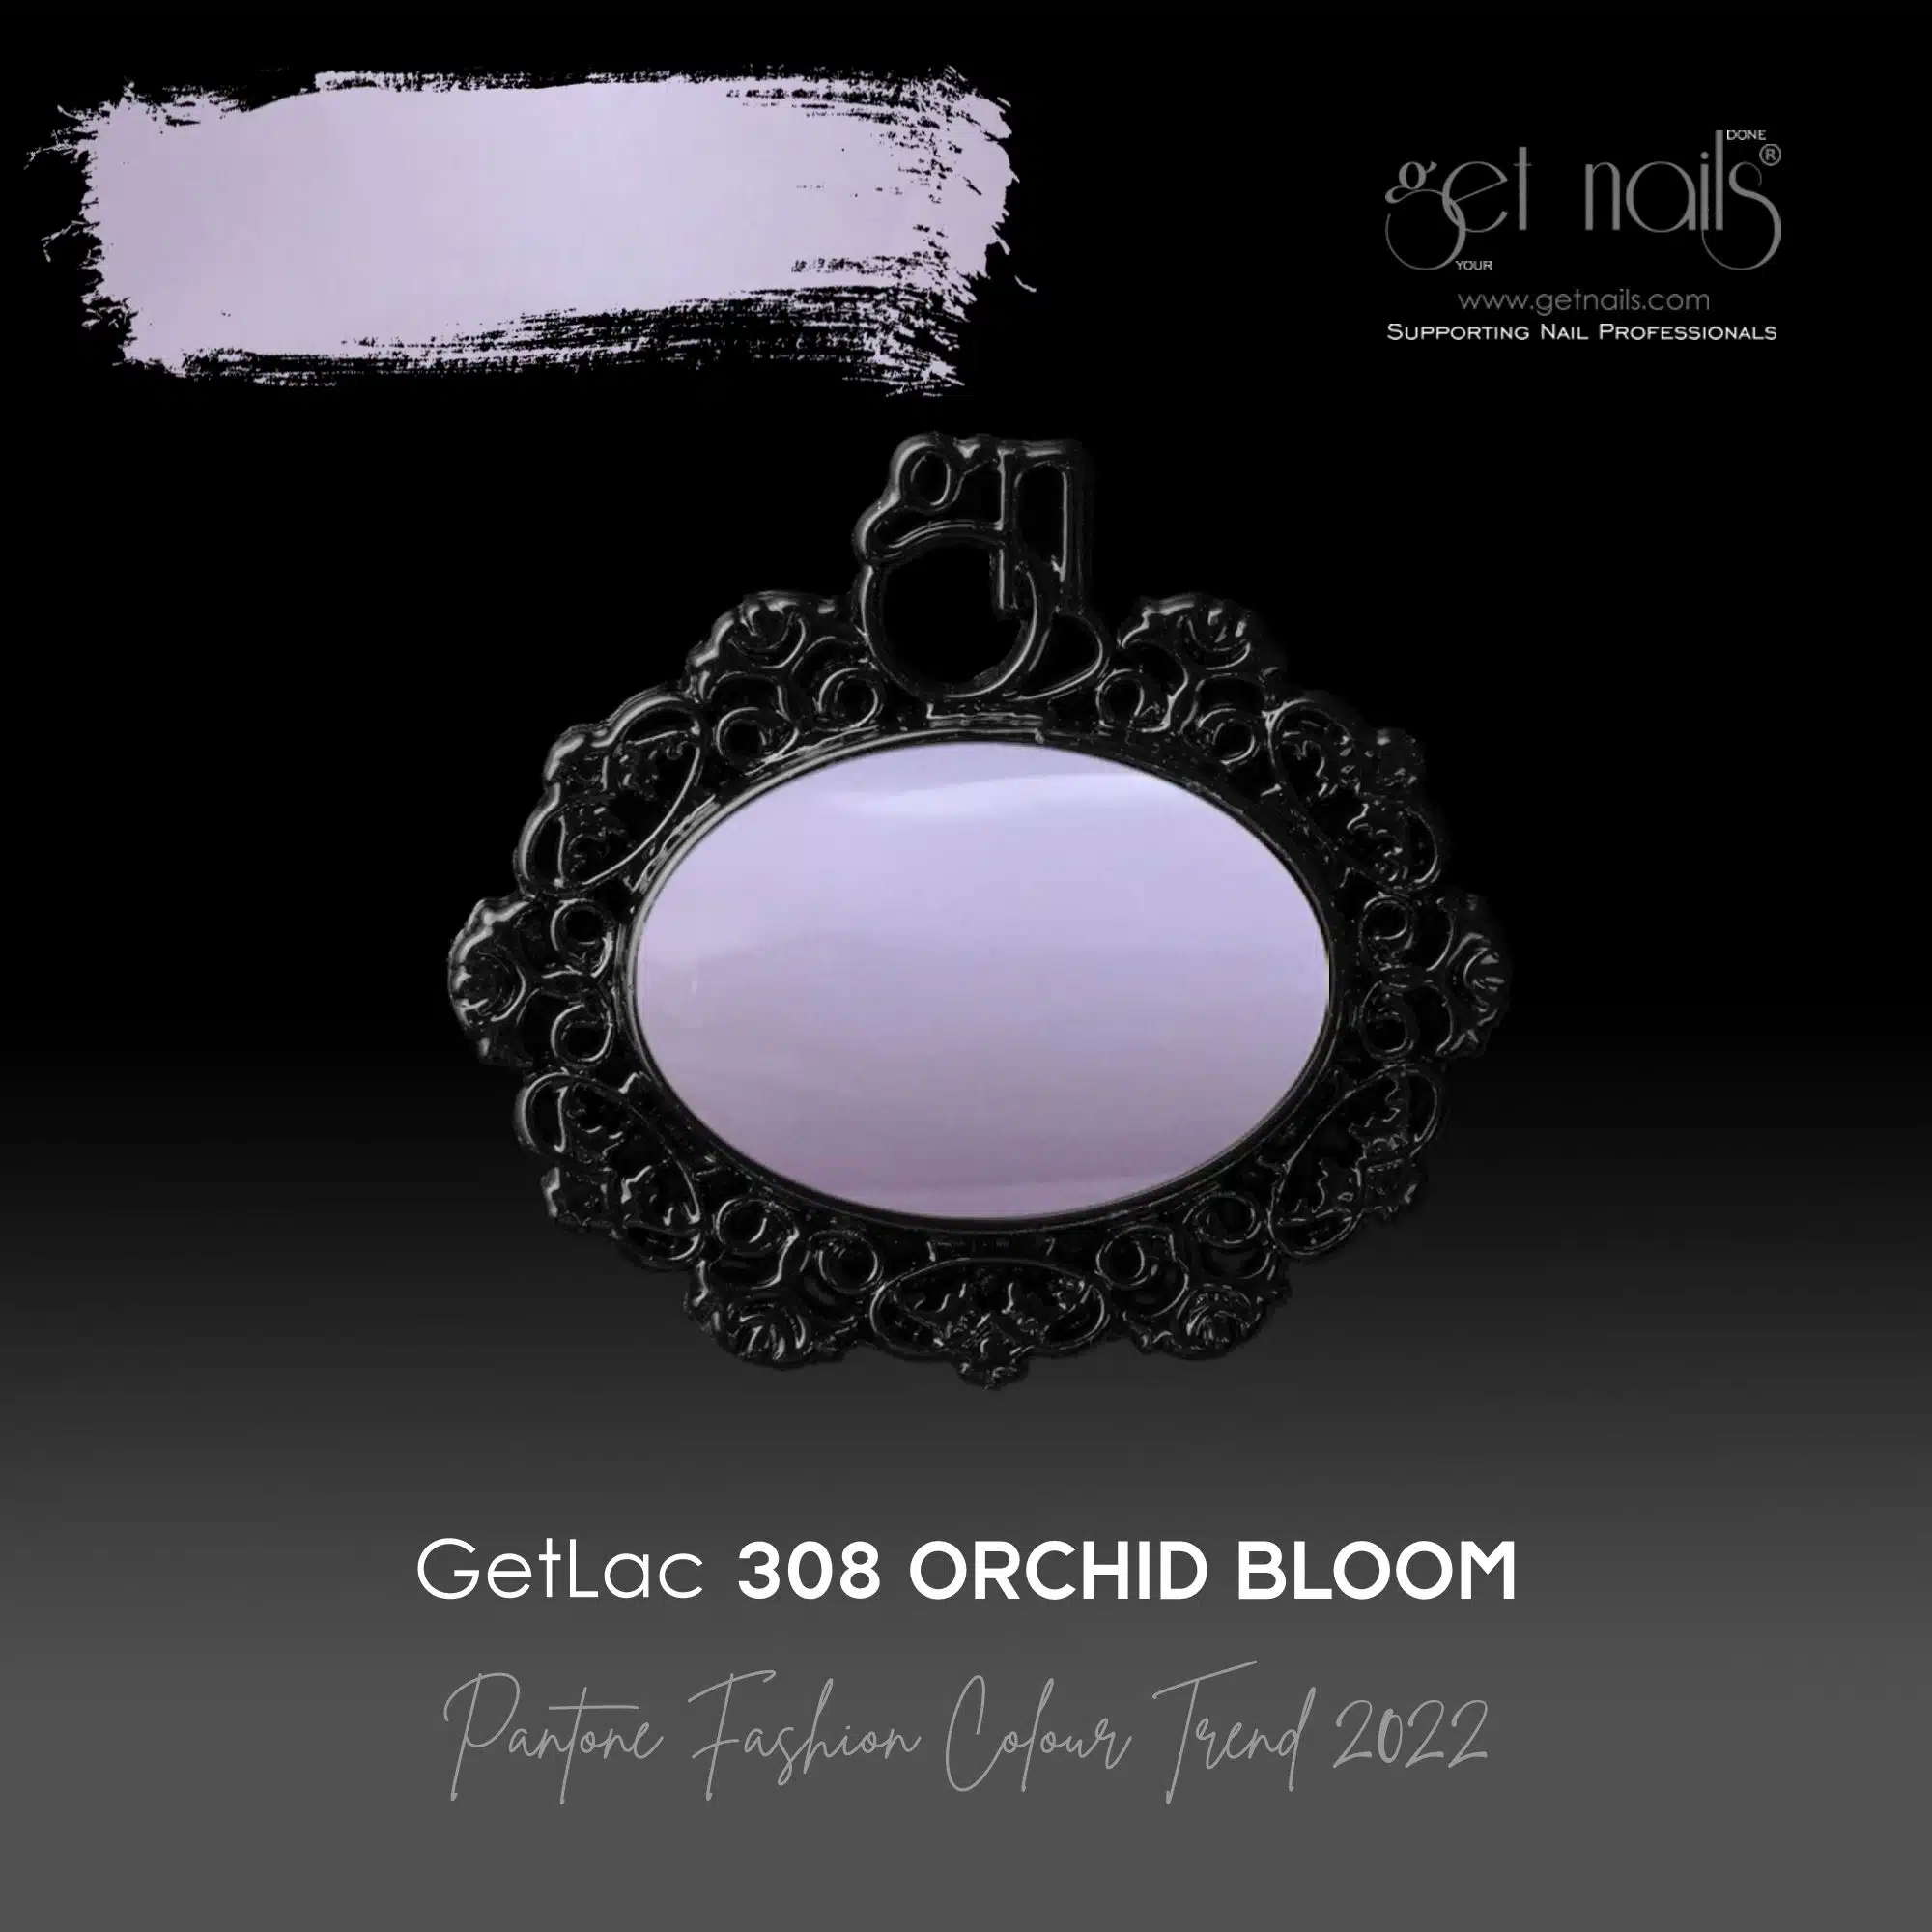 Get Nails Austria - GetLac 308 Orchid Bloom 15g